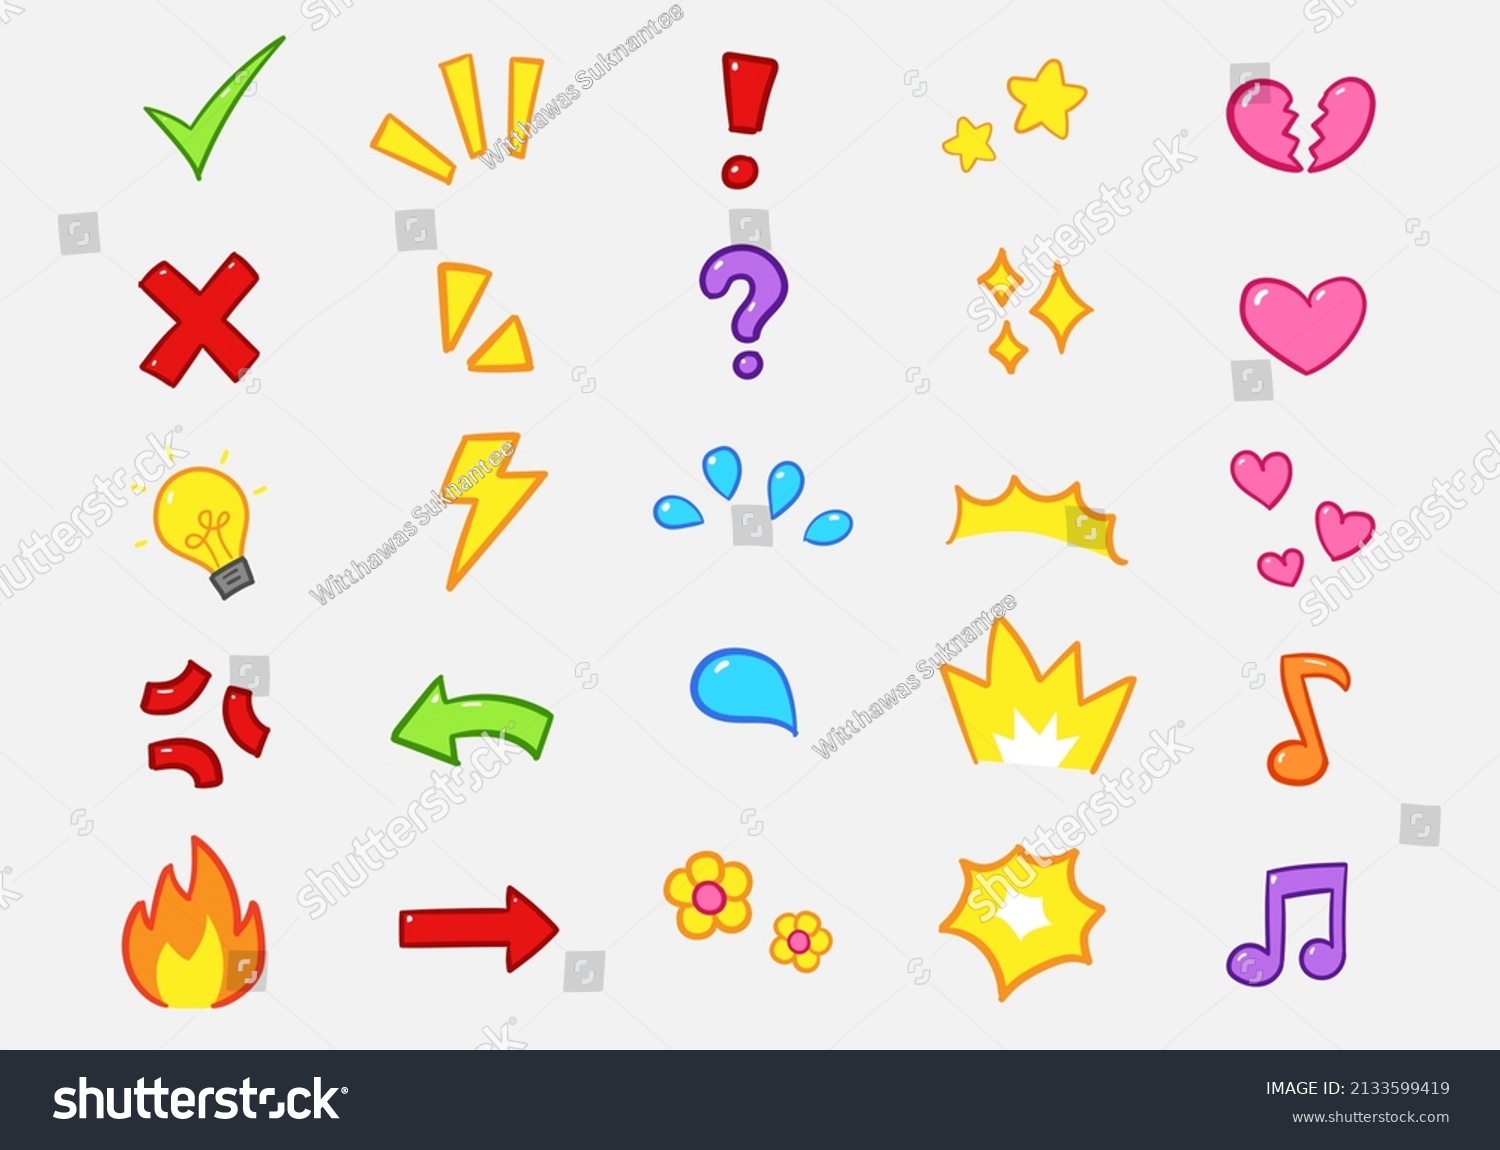 SVG of Vector set of hand-drawn cartoony expression sign doodle, directional arrows, emoticon effects design elements, cartoon character emotion symbols, cute decorative drawing. svg